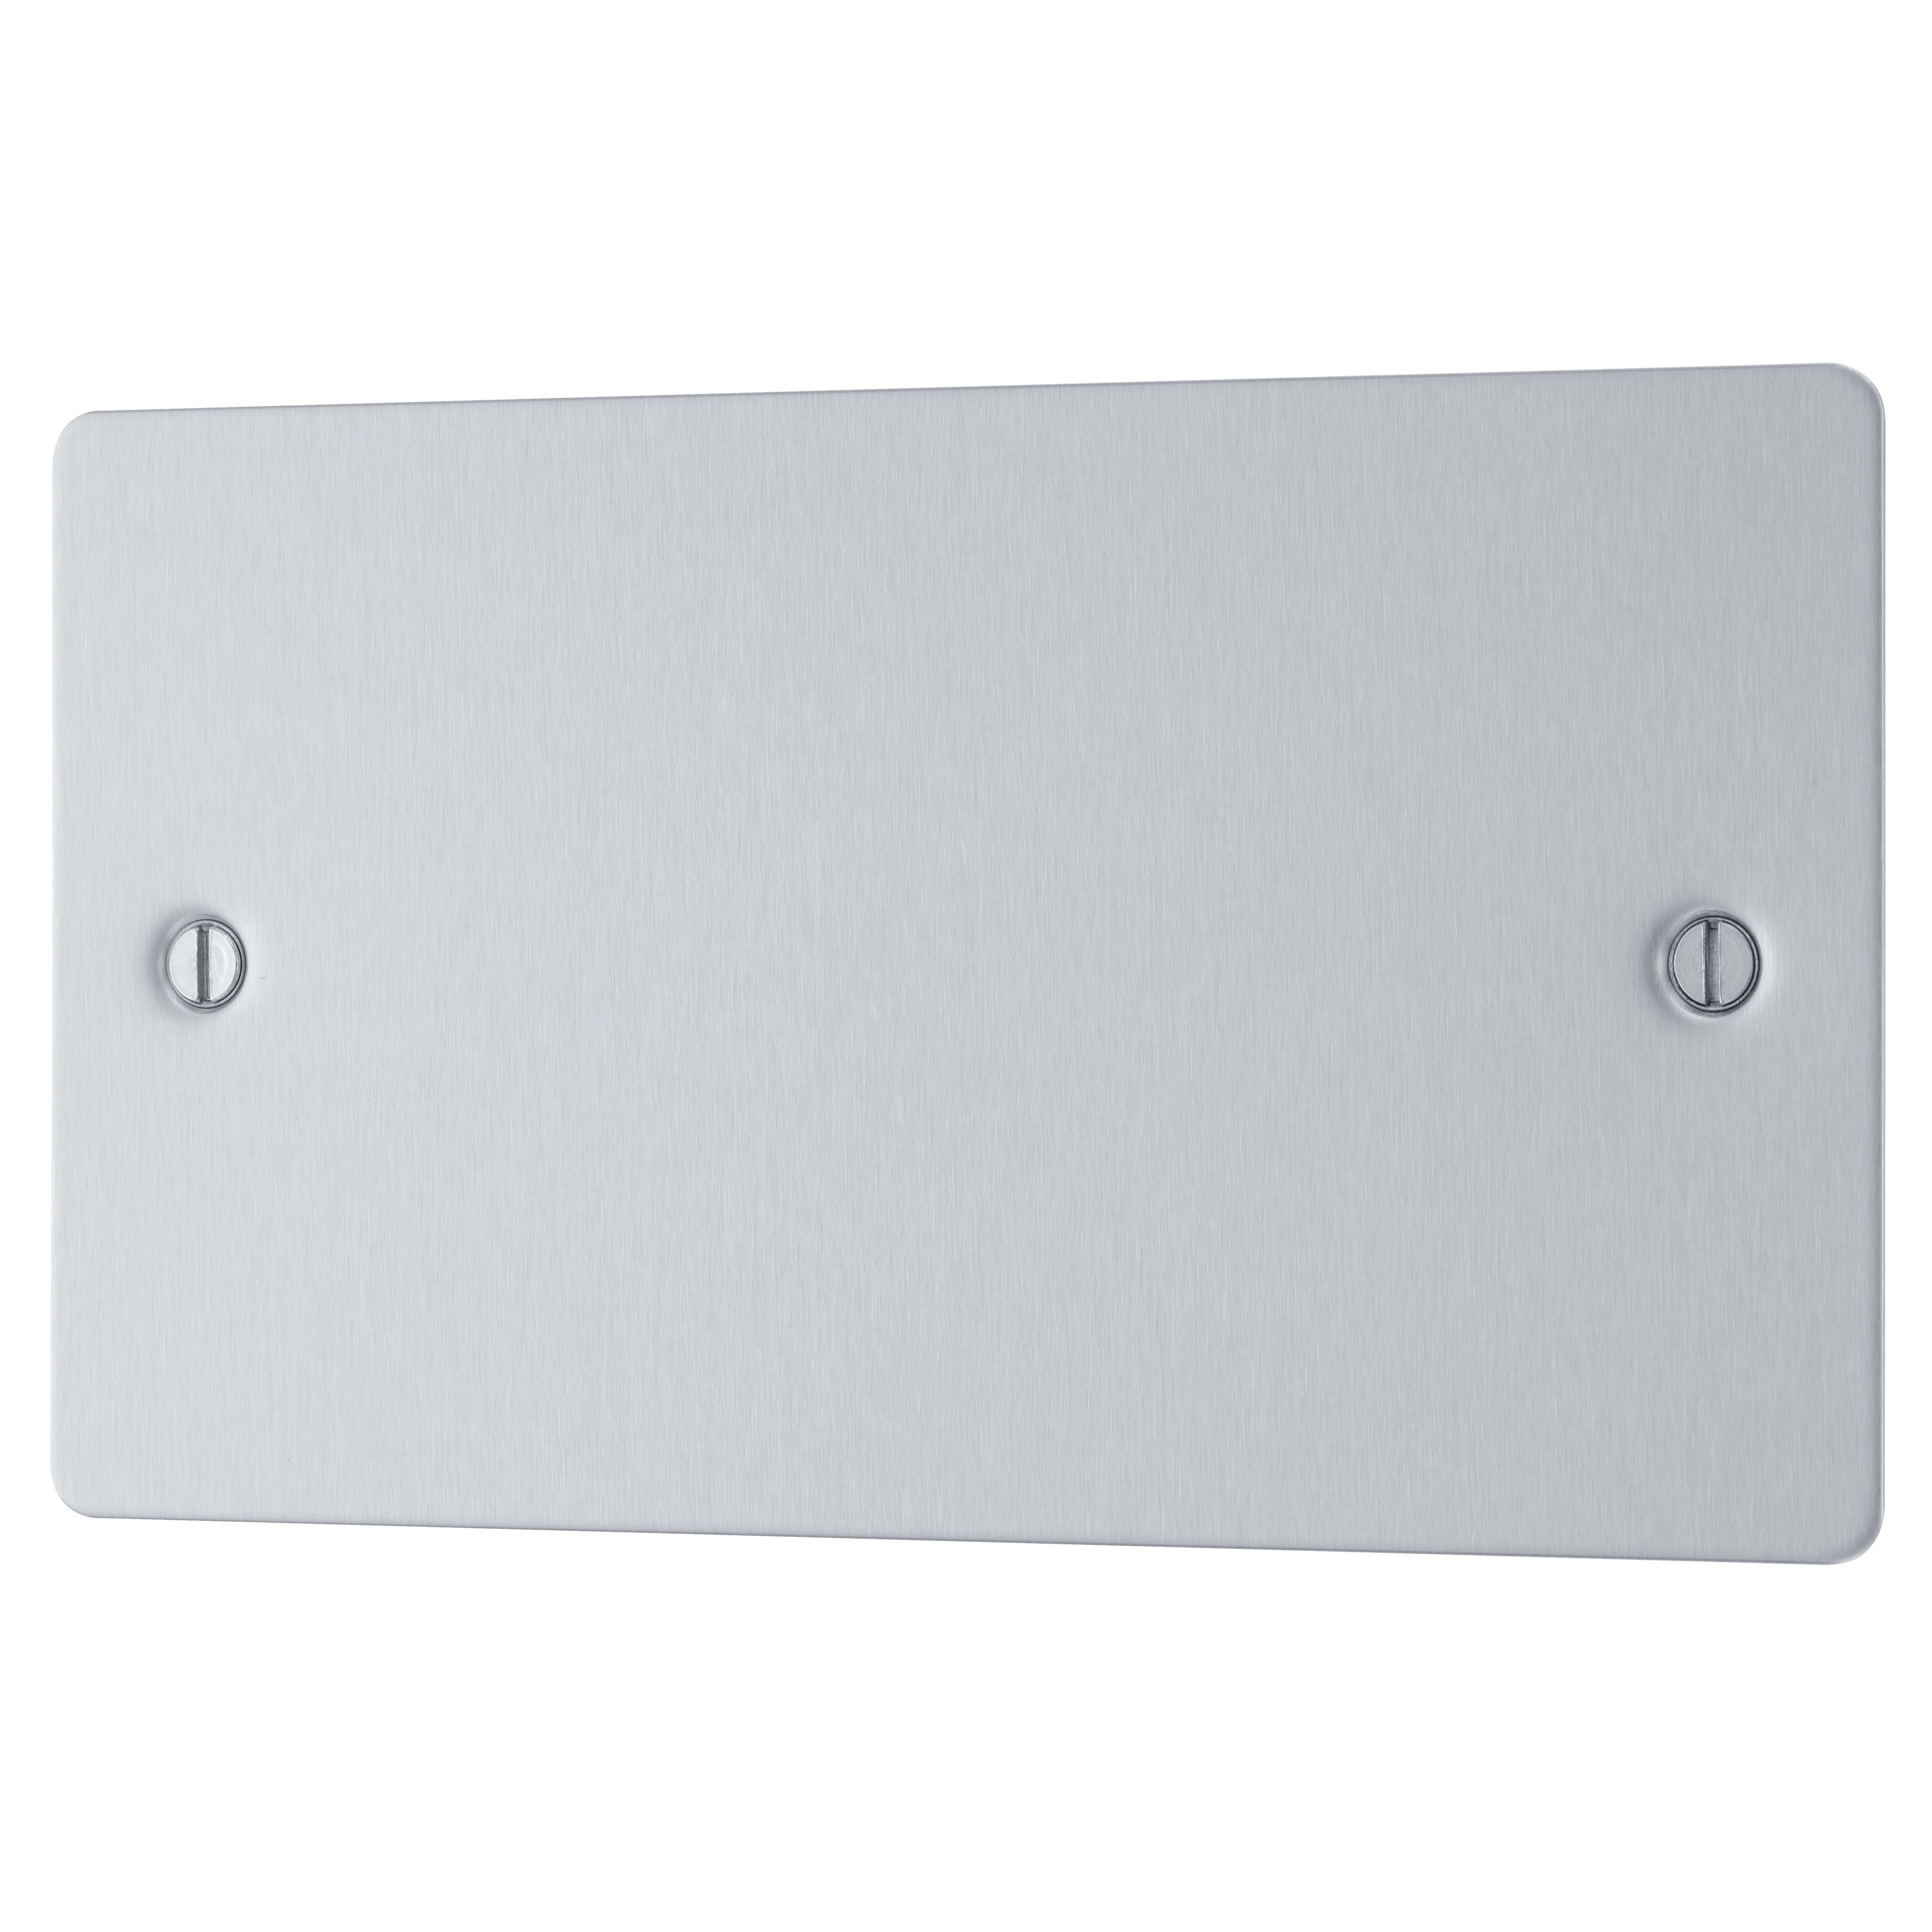 BG Brushed Steel 2 gang Double Blanking plate